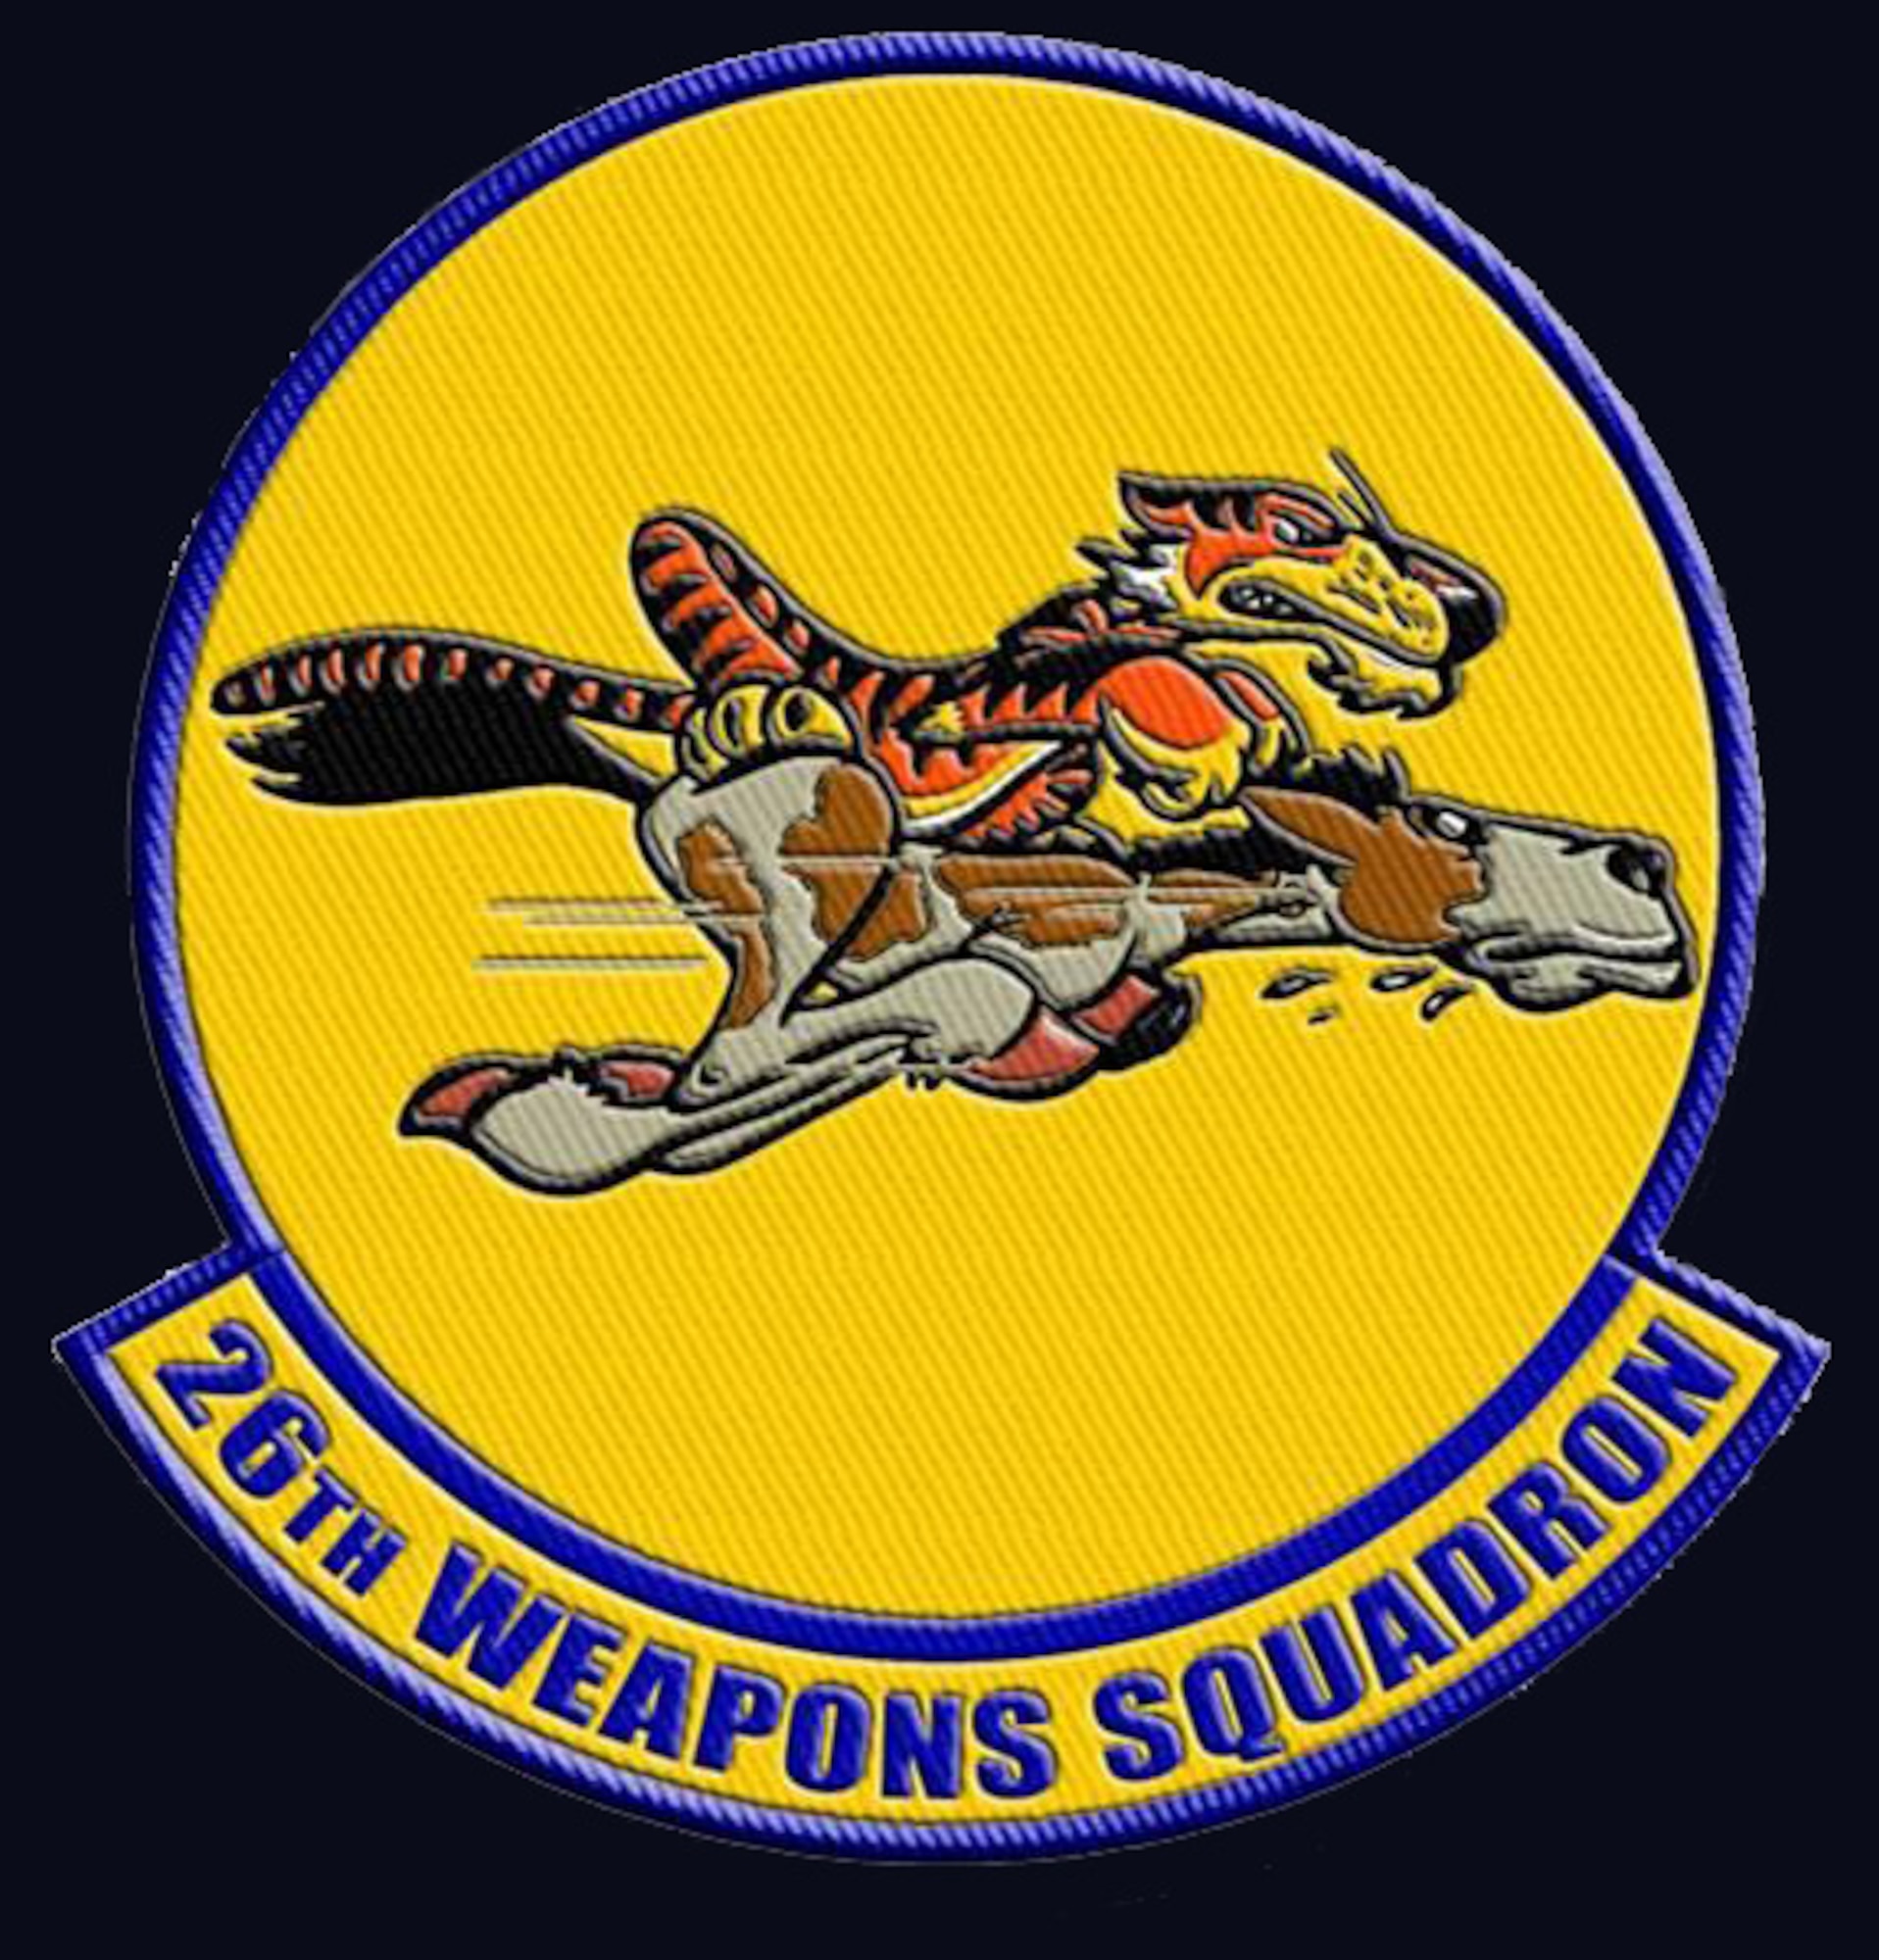 26 Weapons Squadron Patch. (courtesy image)